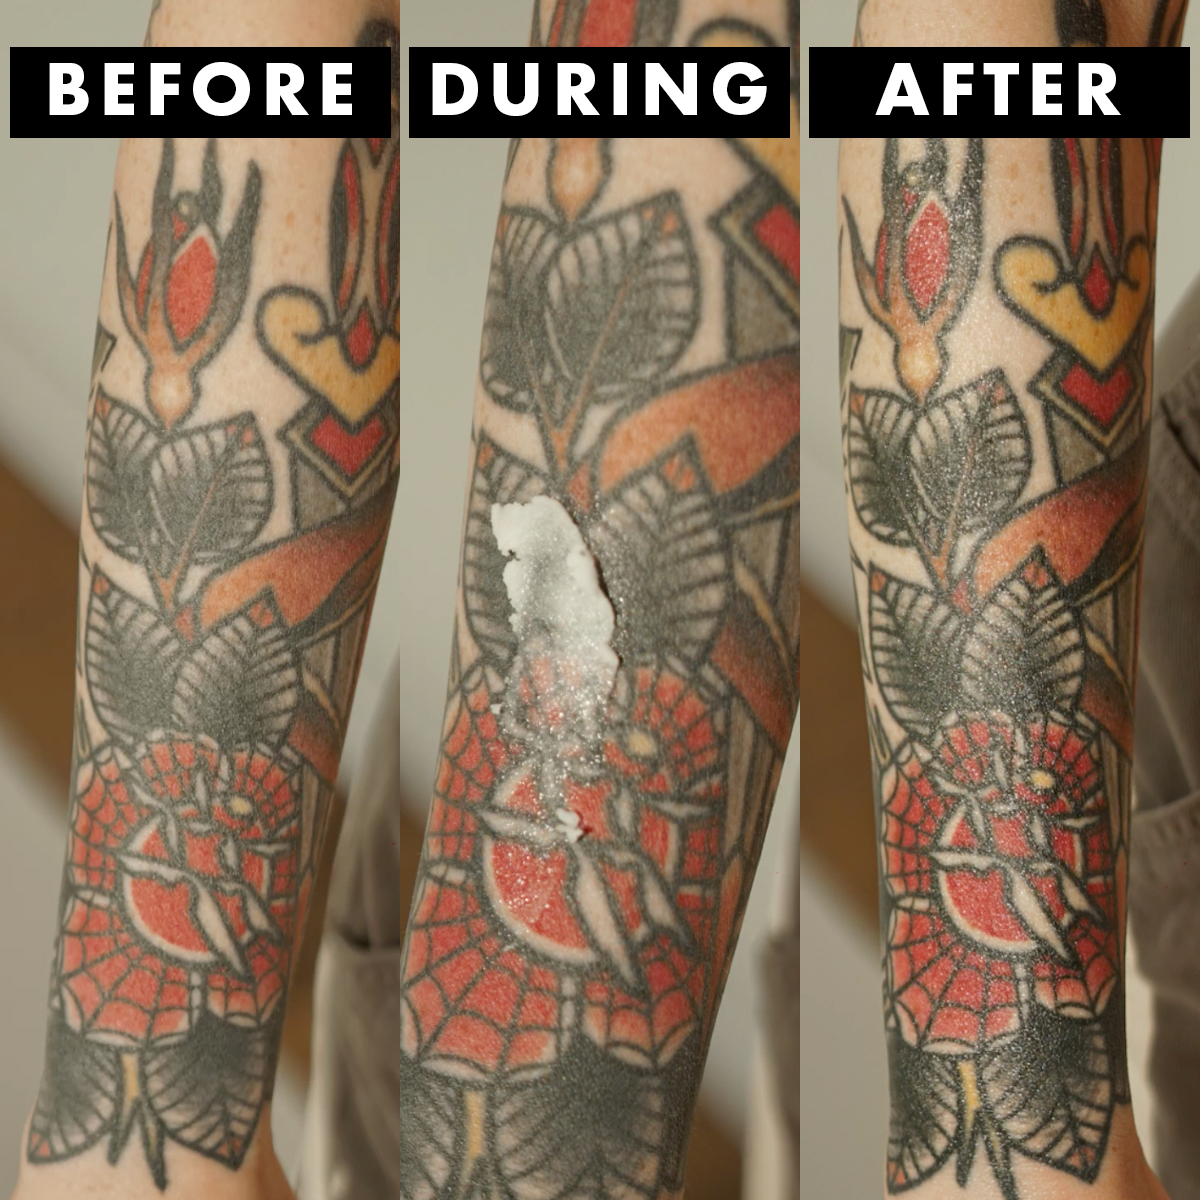 Tattoo Infection Symptoms and Treatment